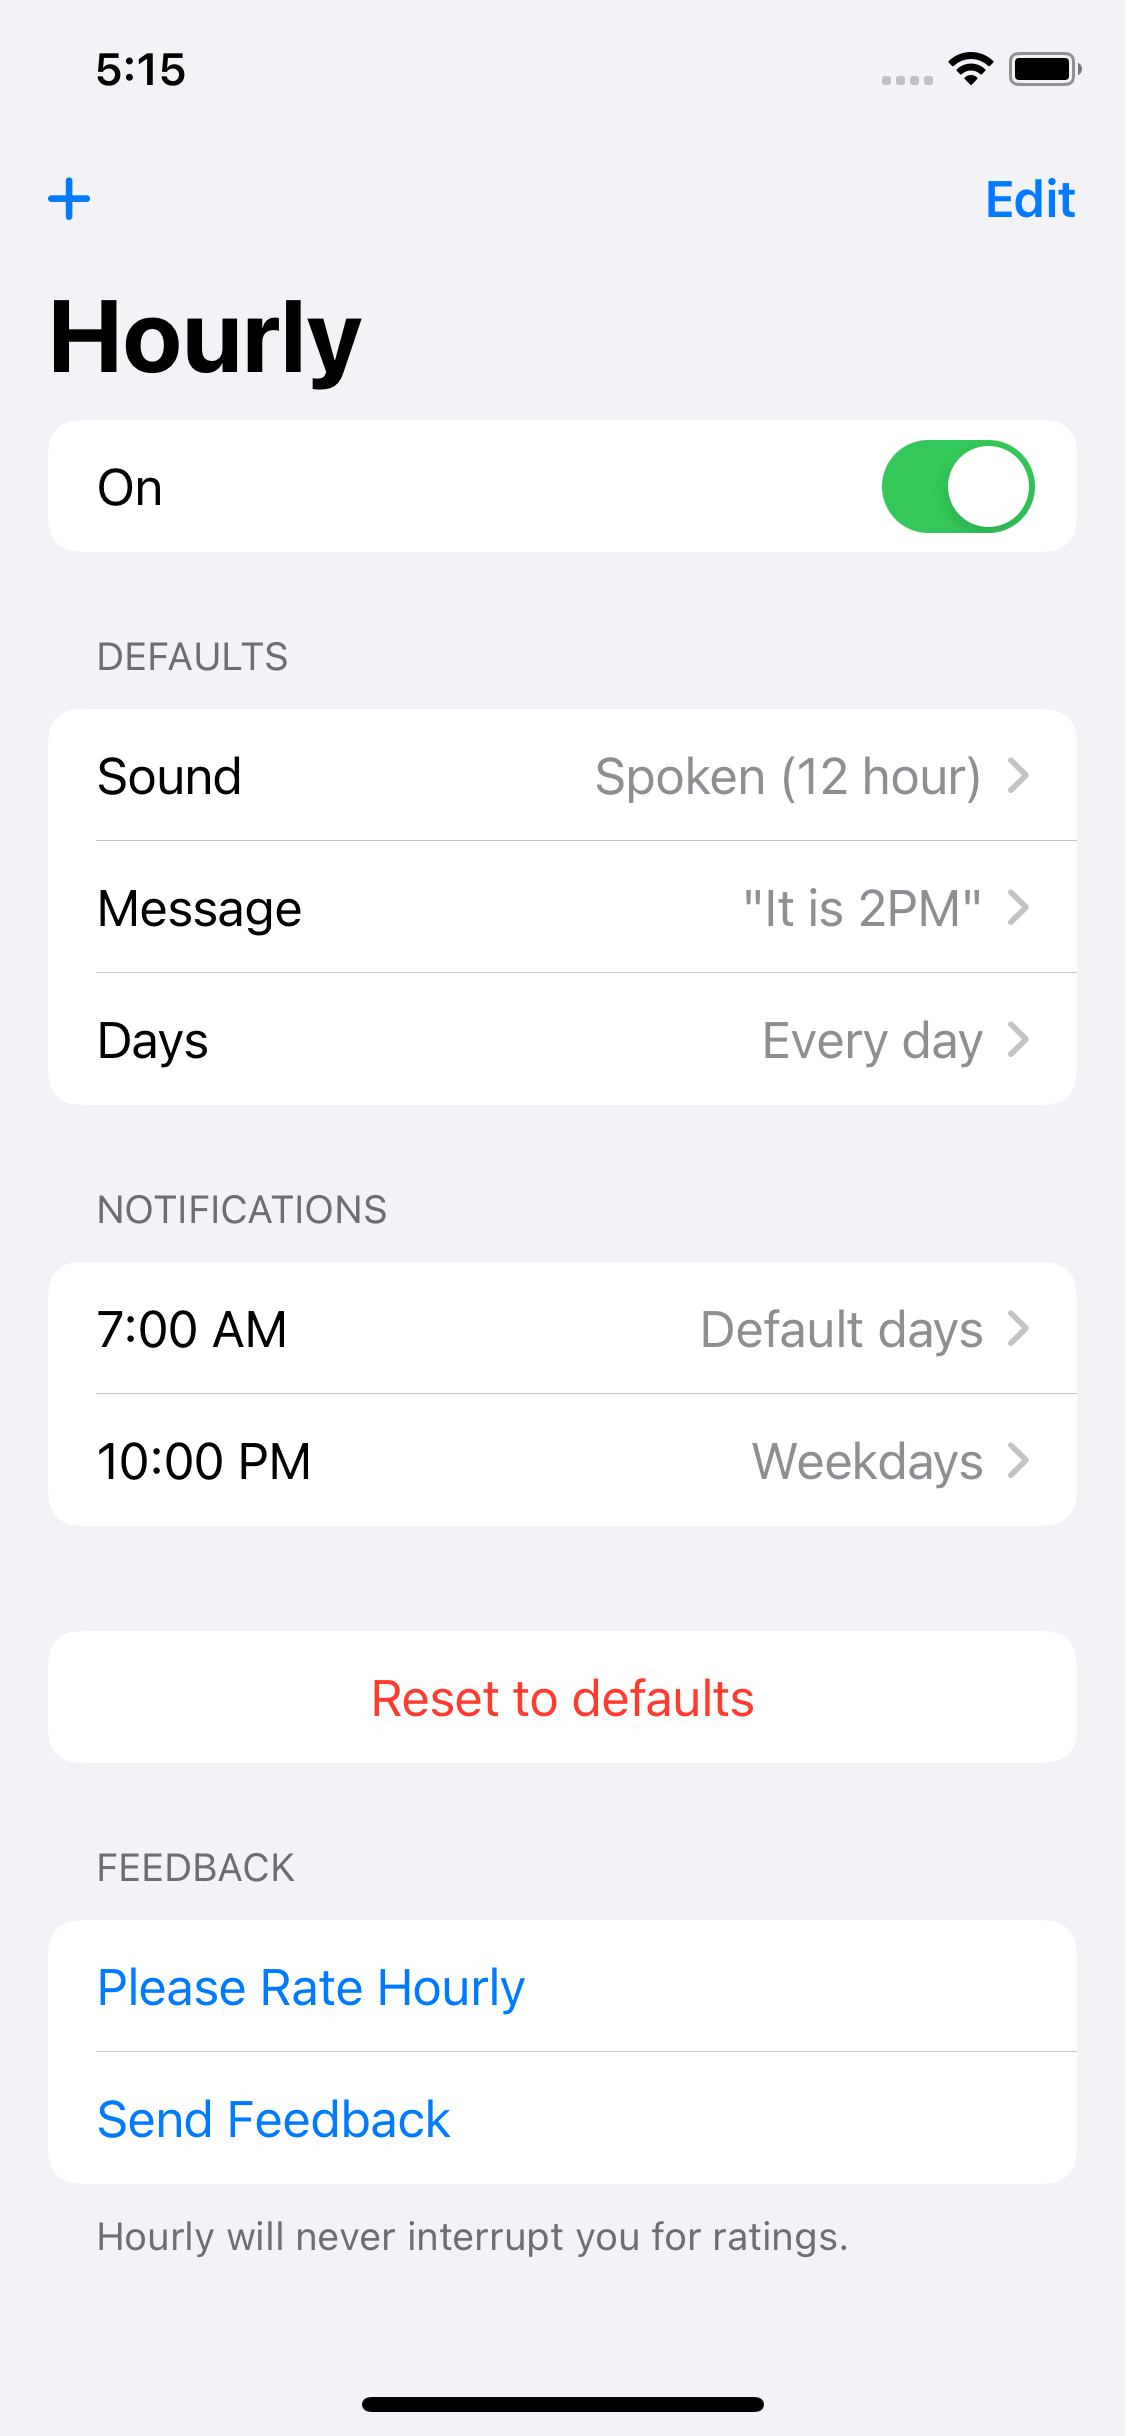 Main screen with global settings and the times of notifications